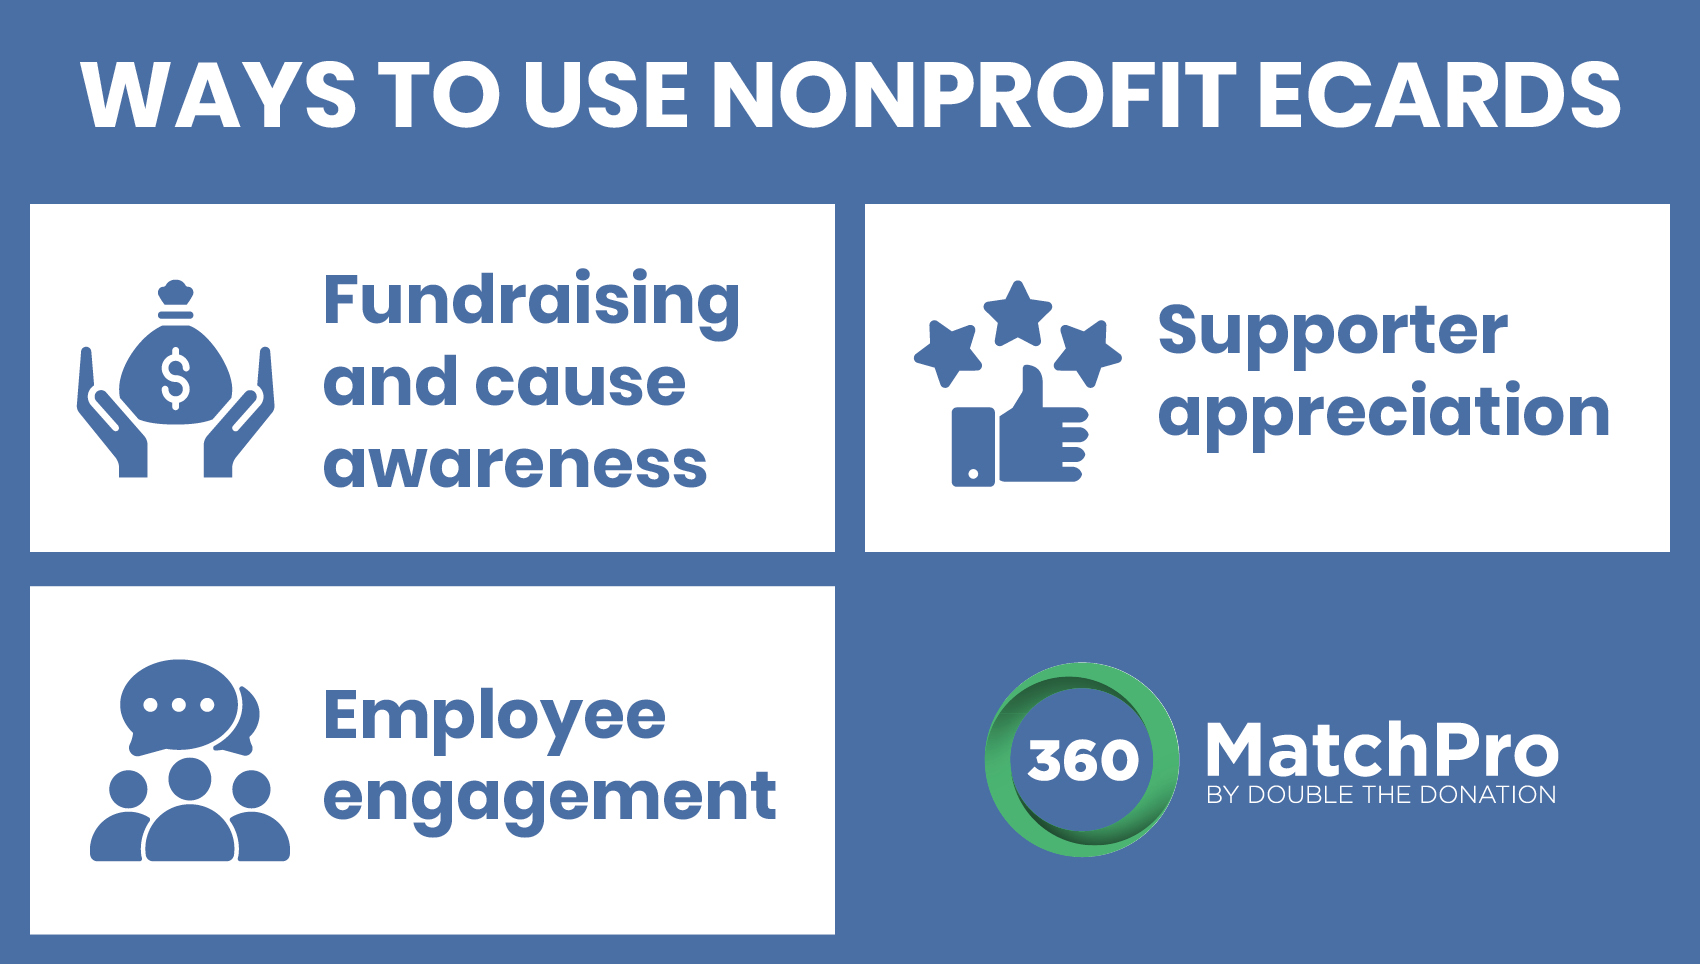 Ways to use nonprofit eCards, explained in the bulleted list below